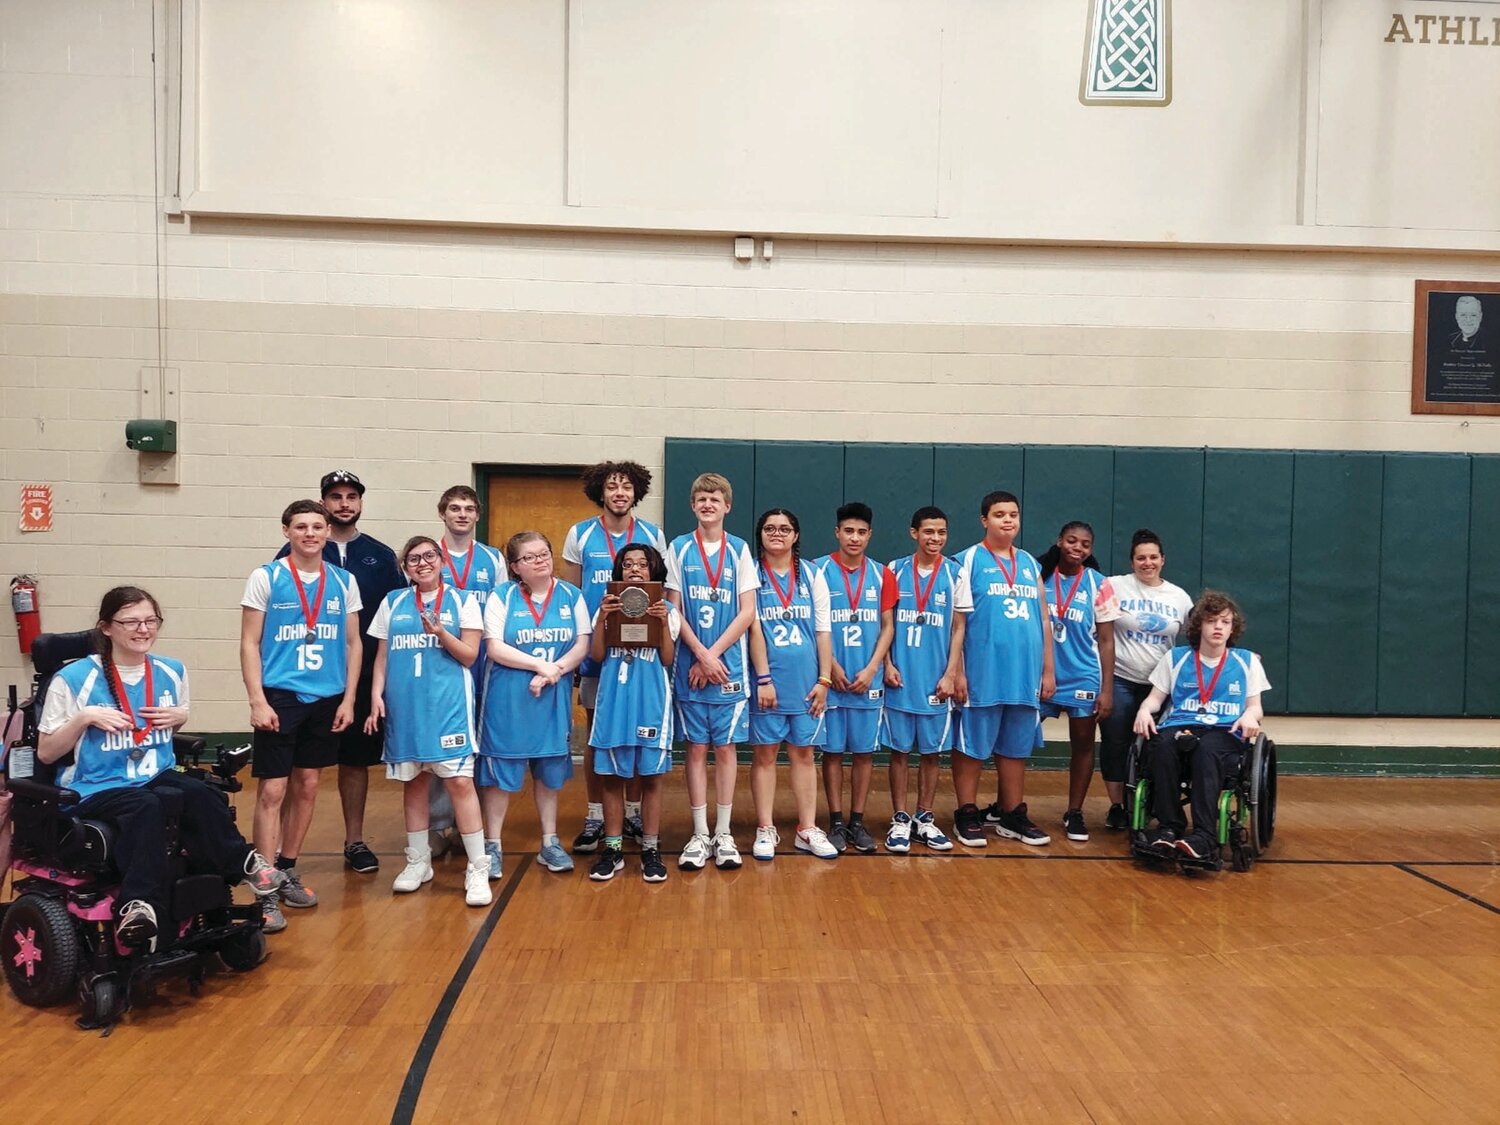 JHS Unified Panthers at their championship game, where they placed second place in their division!